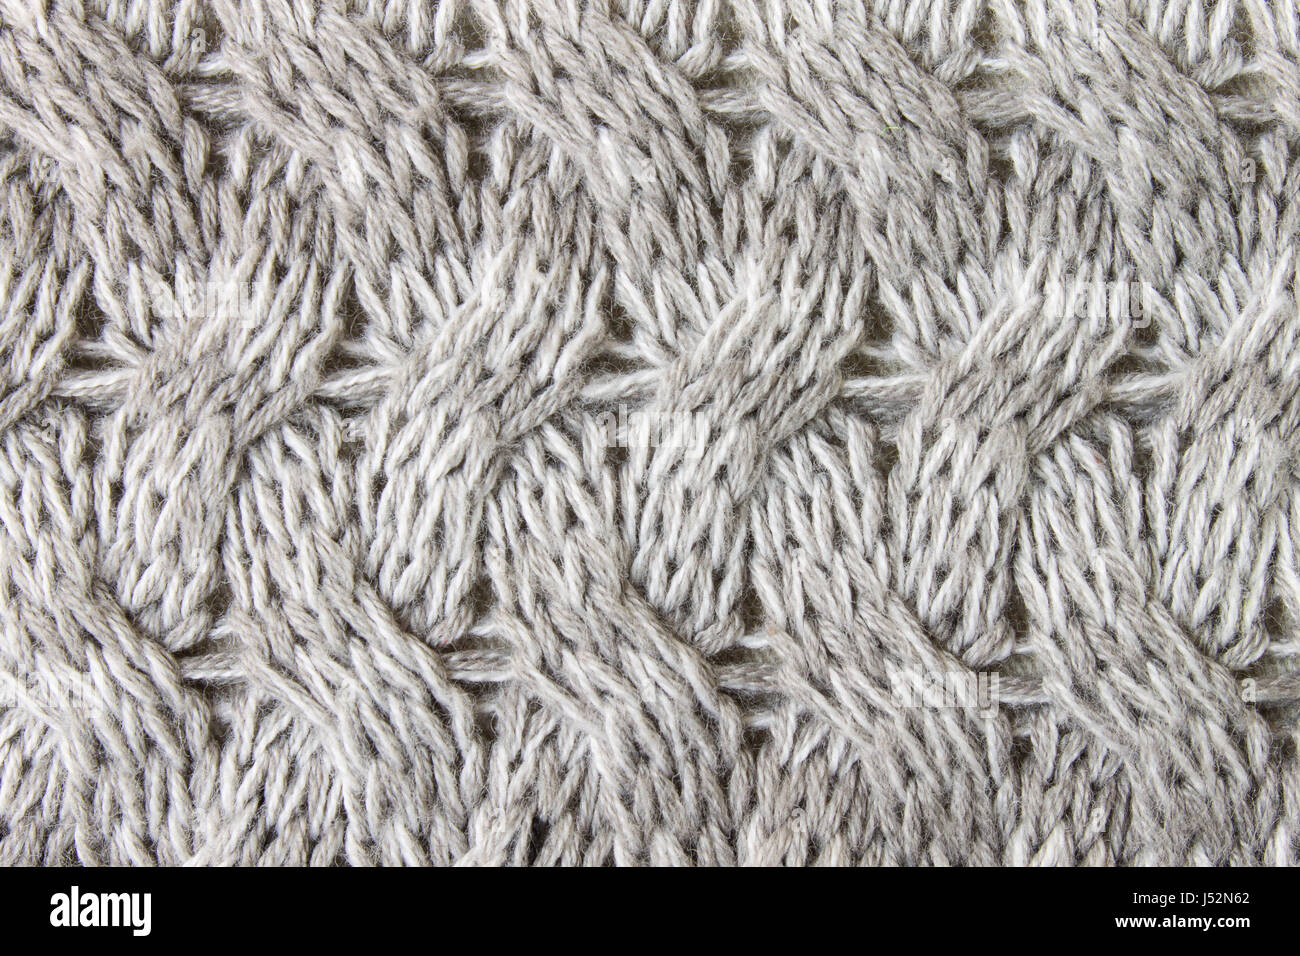 Gray Knitting Fabric Texture Background Or Knitted Pattern Stock